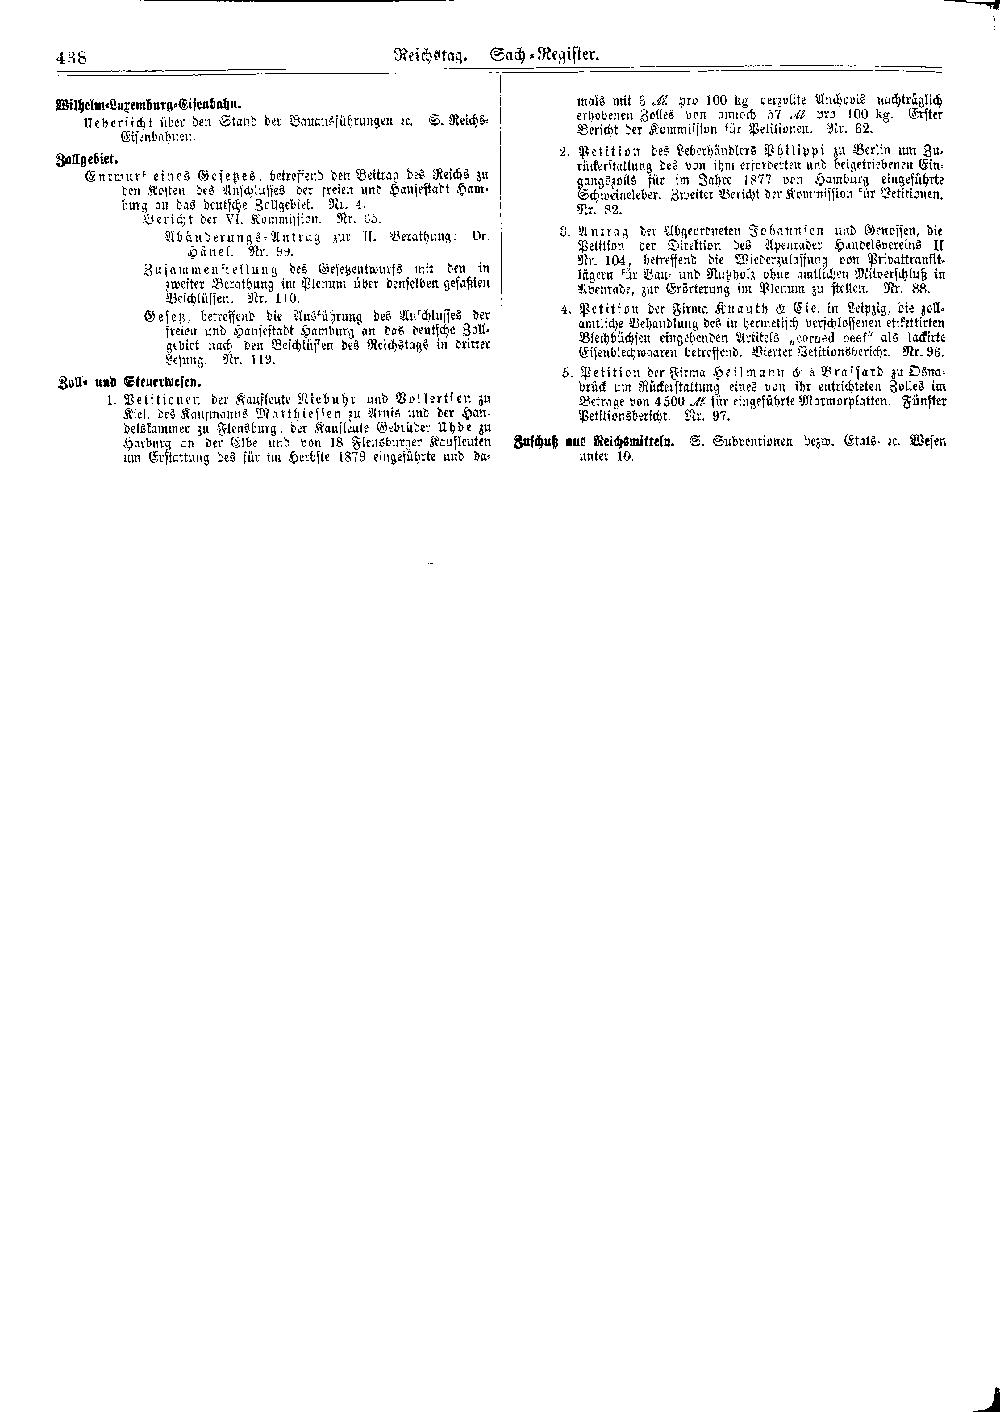 Scan of page 438